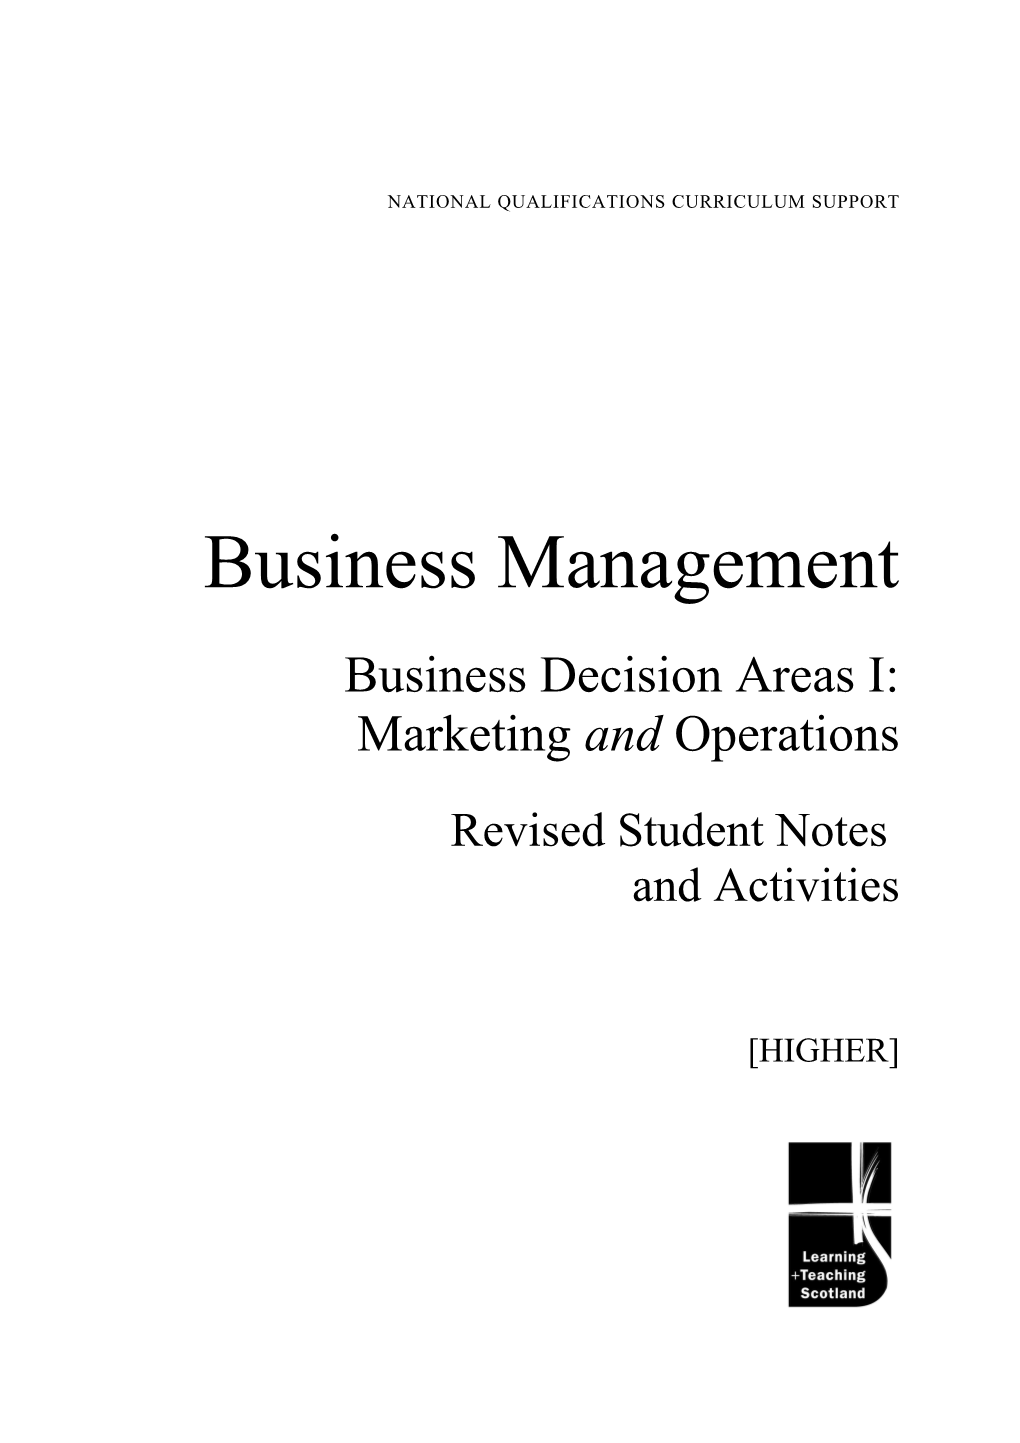 Business Management: Business Decision Areas 1